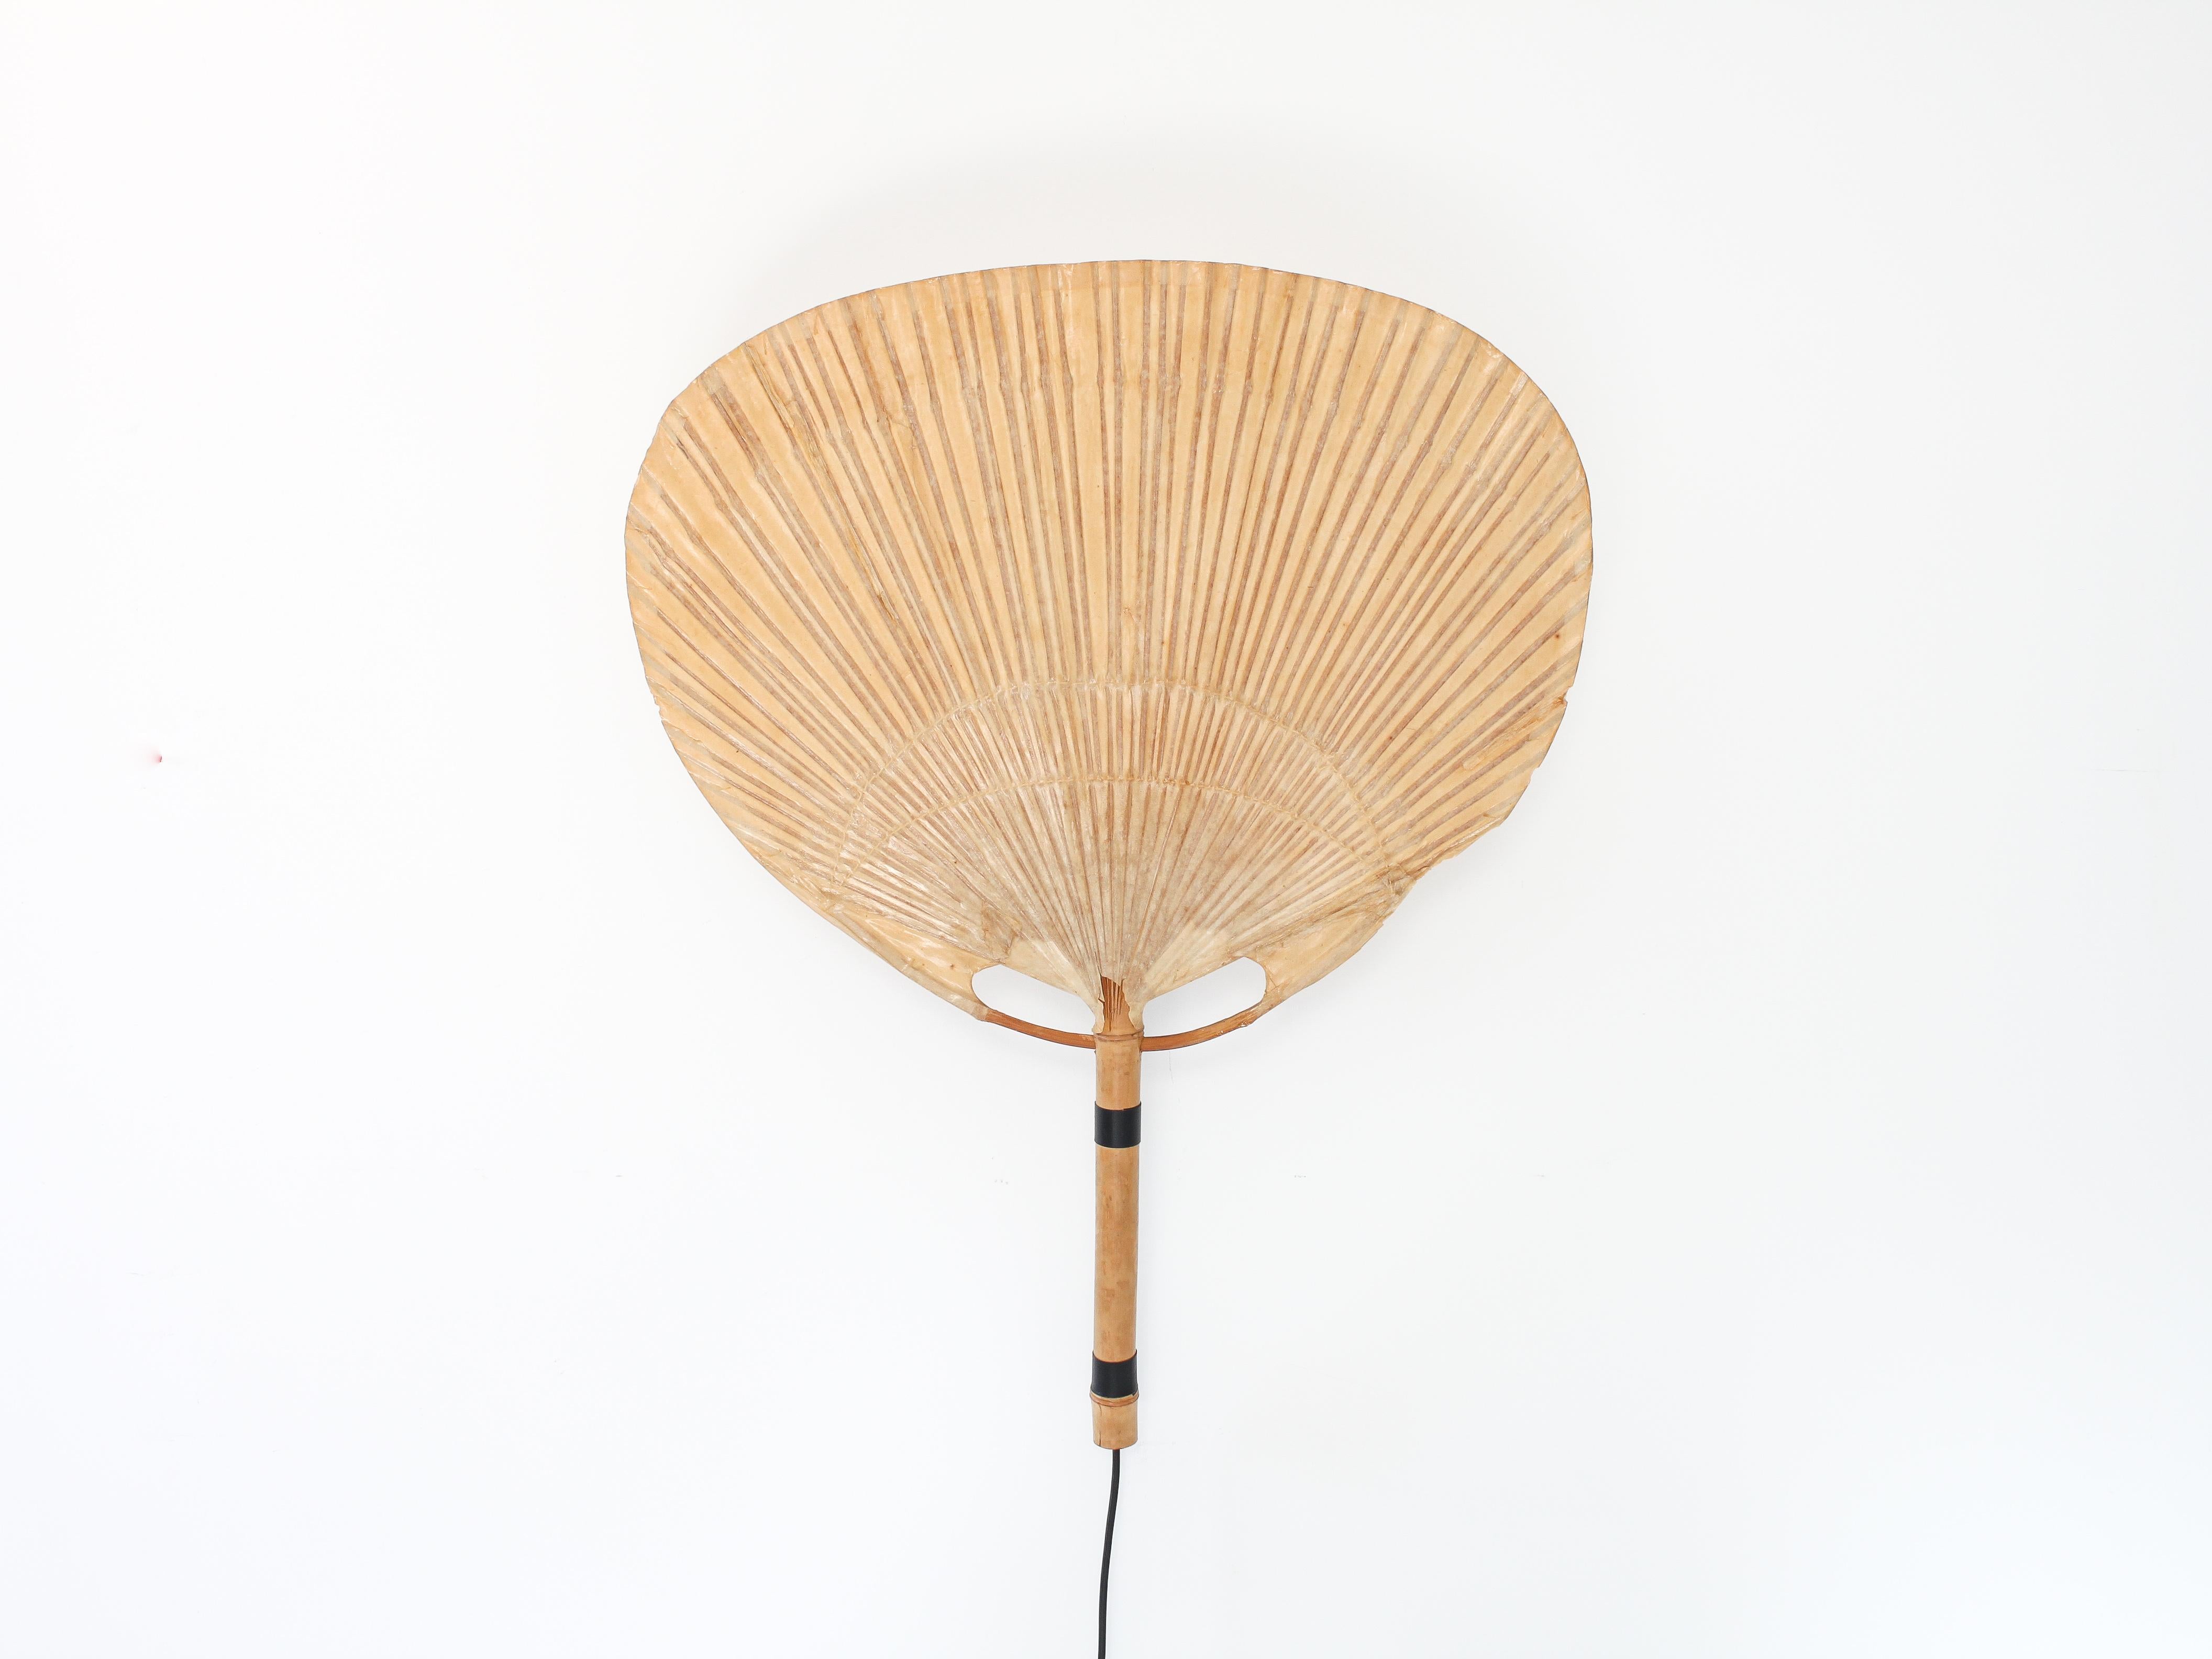 An “Uchiwa” wall light by Ingo Maurer for M design, Germany, 1970s. 

Uchiwa lamps, uchiwa being the Japanese for fan, were handmade from bamboo, wicker and Japanese rice paper. Maurer travelled to Japan to develop his uchiwa range where he found